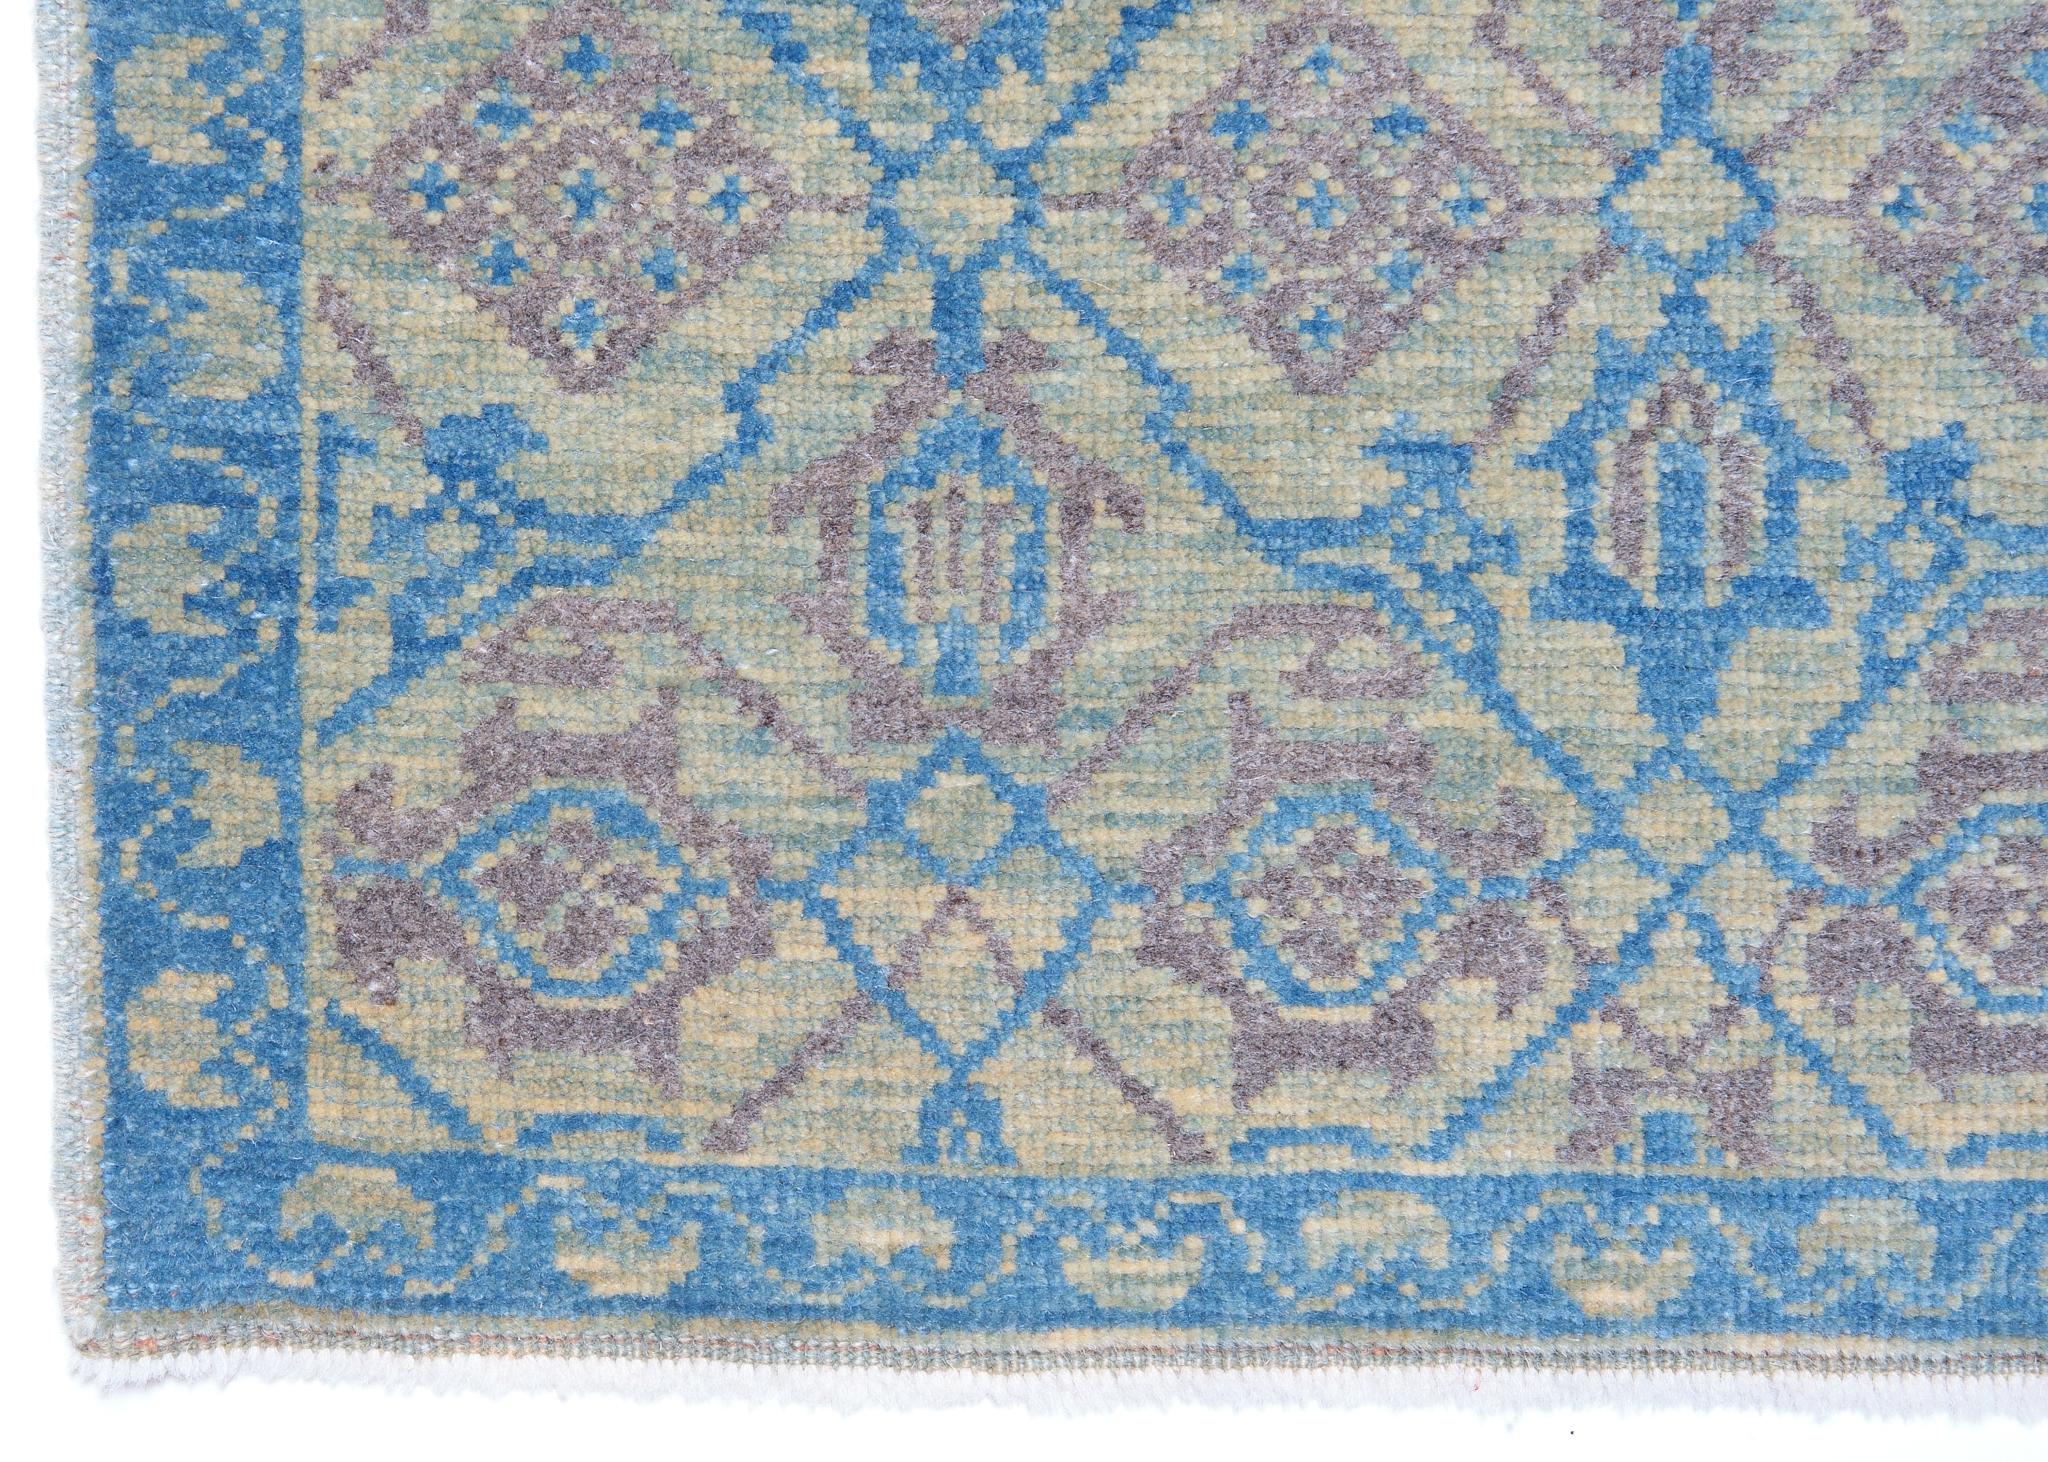 This lattice pattern is composed of palmettes and leaves filling the various compartments against the imposing ground. One has the impression that it is only part of a larger scheme designed 15th century rug from the Mamluk era, Cairo region, Eygpt.